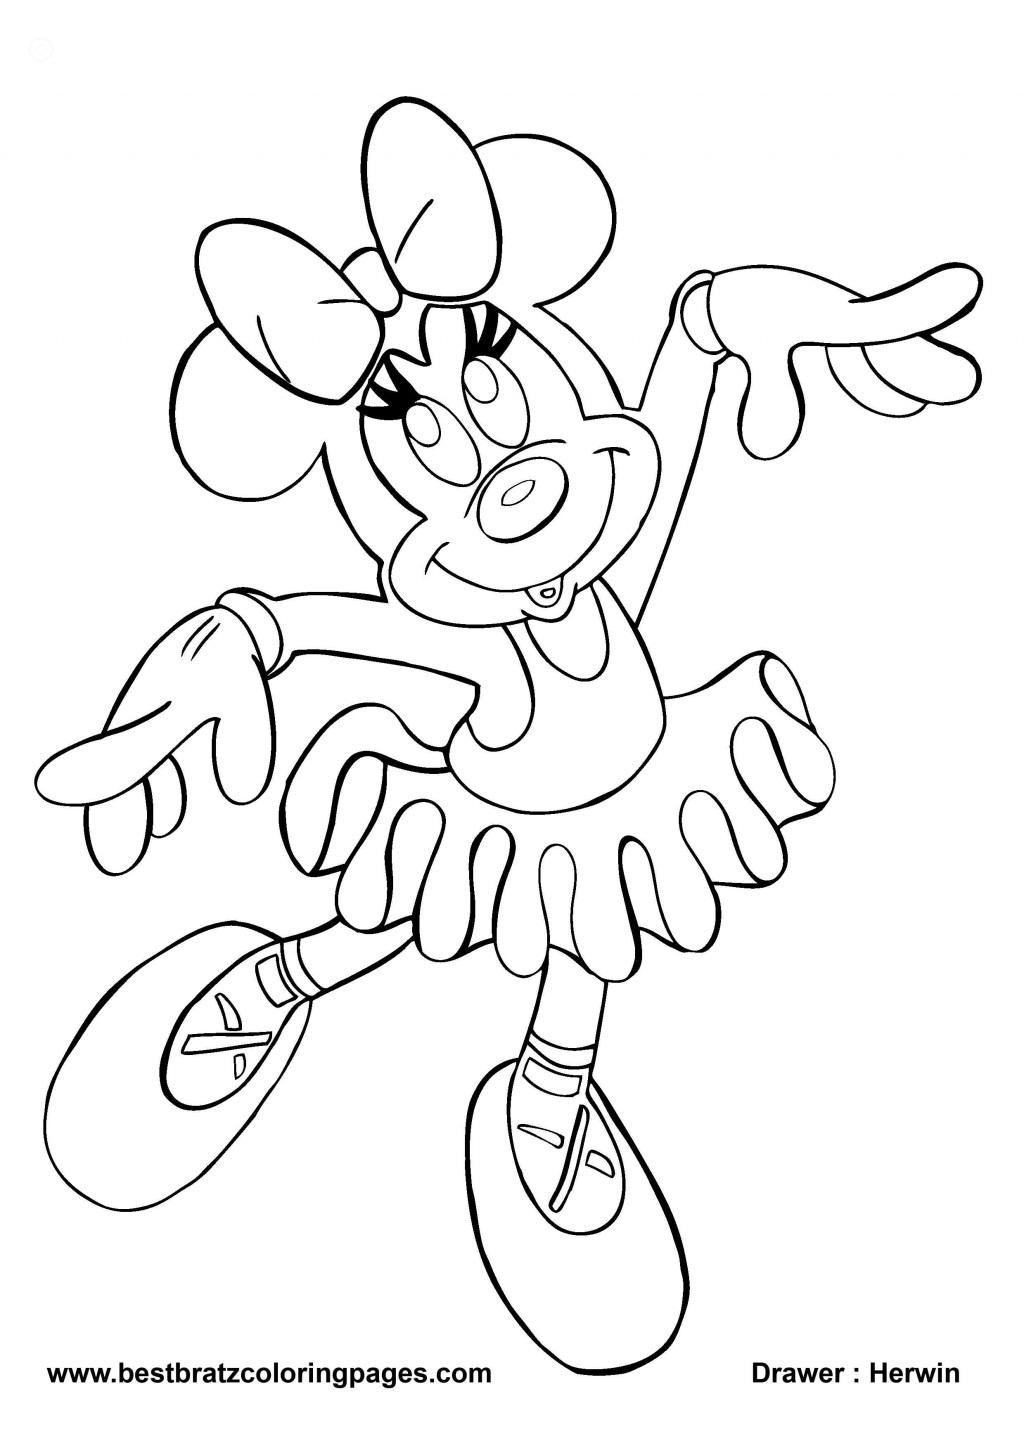 Free Coloring Pages Of Minnie Mouse
 Minnie Mouse Coloring Pages Disney Bestofcoloring